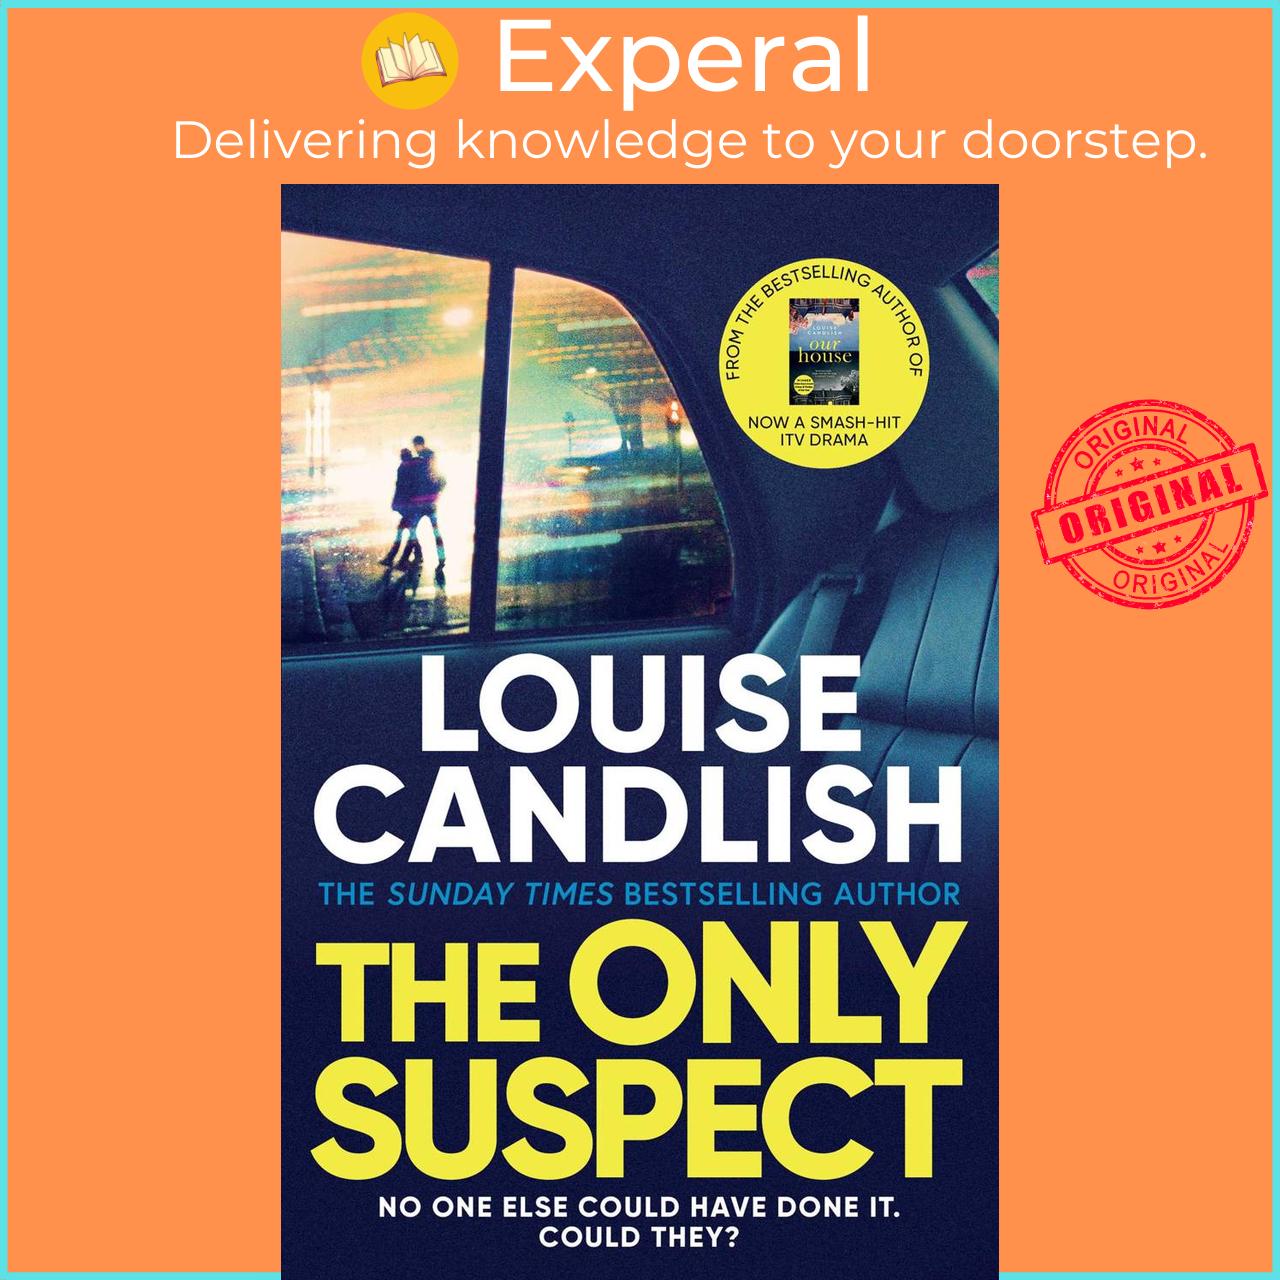 Hình ảnh Sách - The Only Suspect - A 'twisting, seductive, ingenious' thriller from th by Louise Candlish (UK edition, paperback)